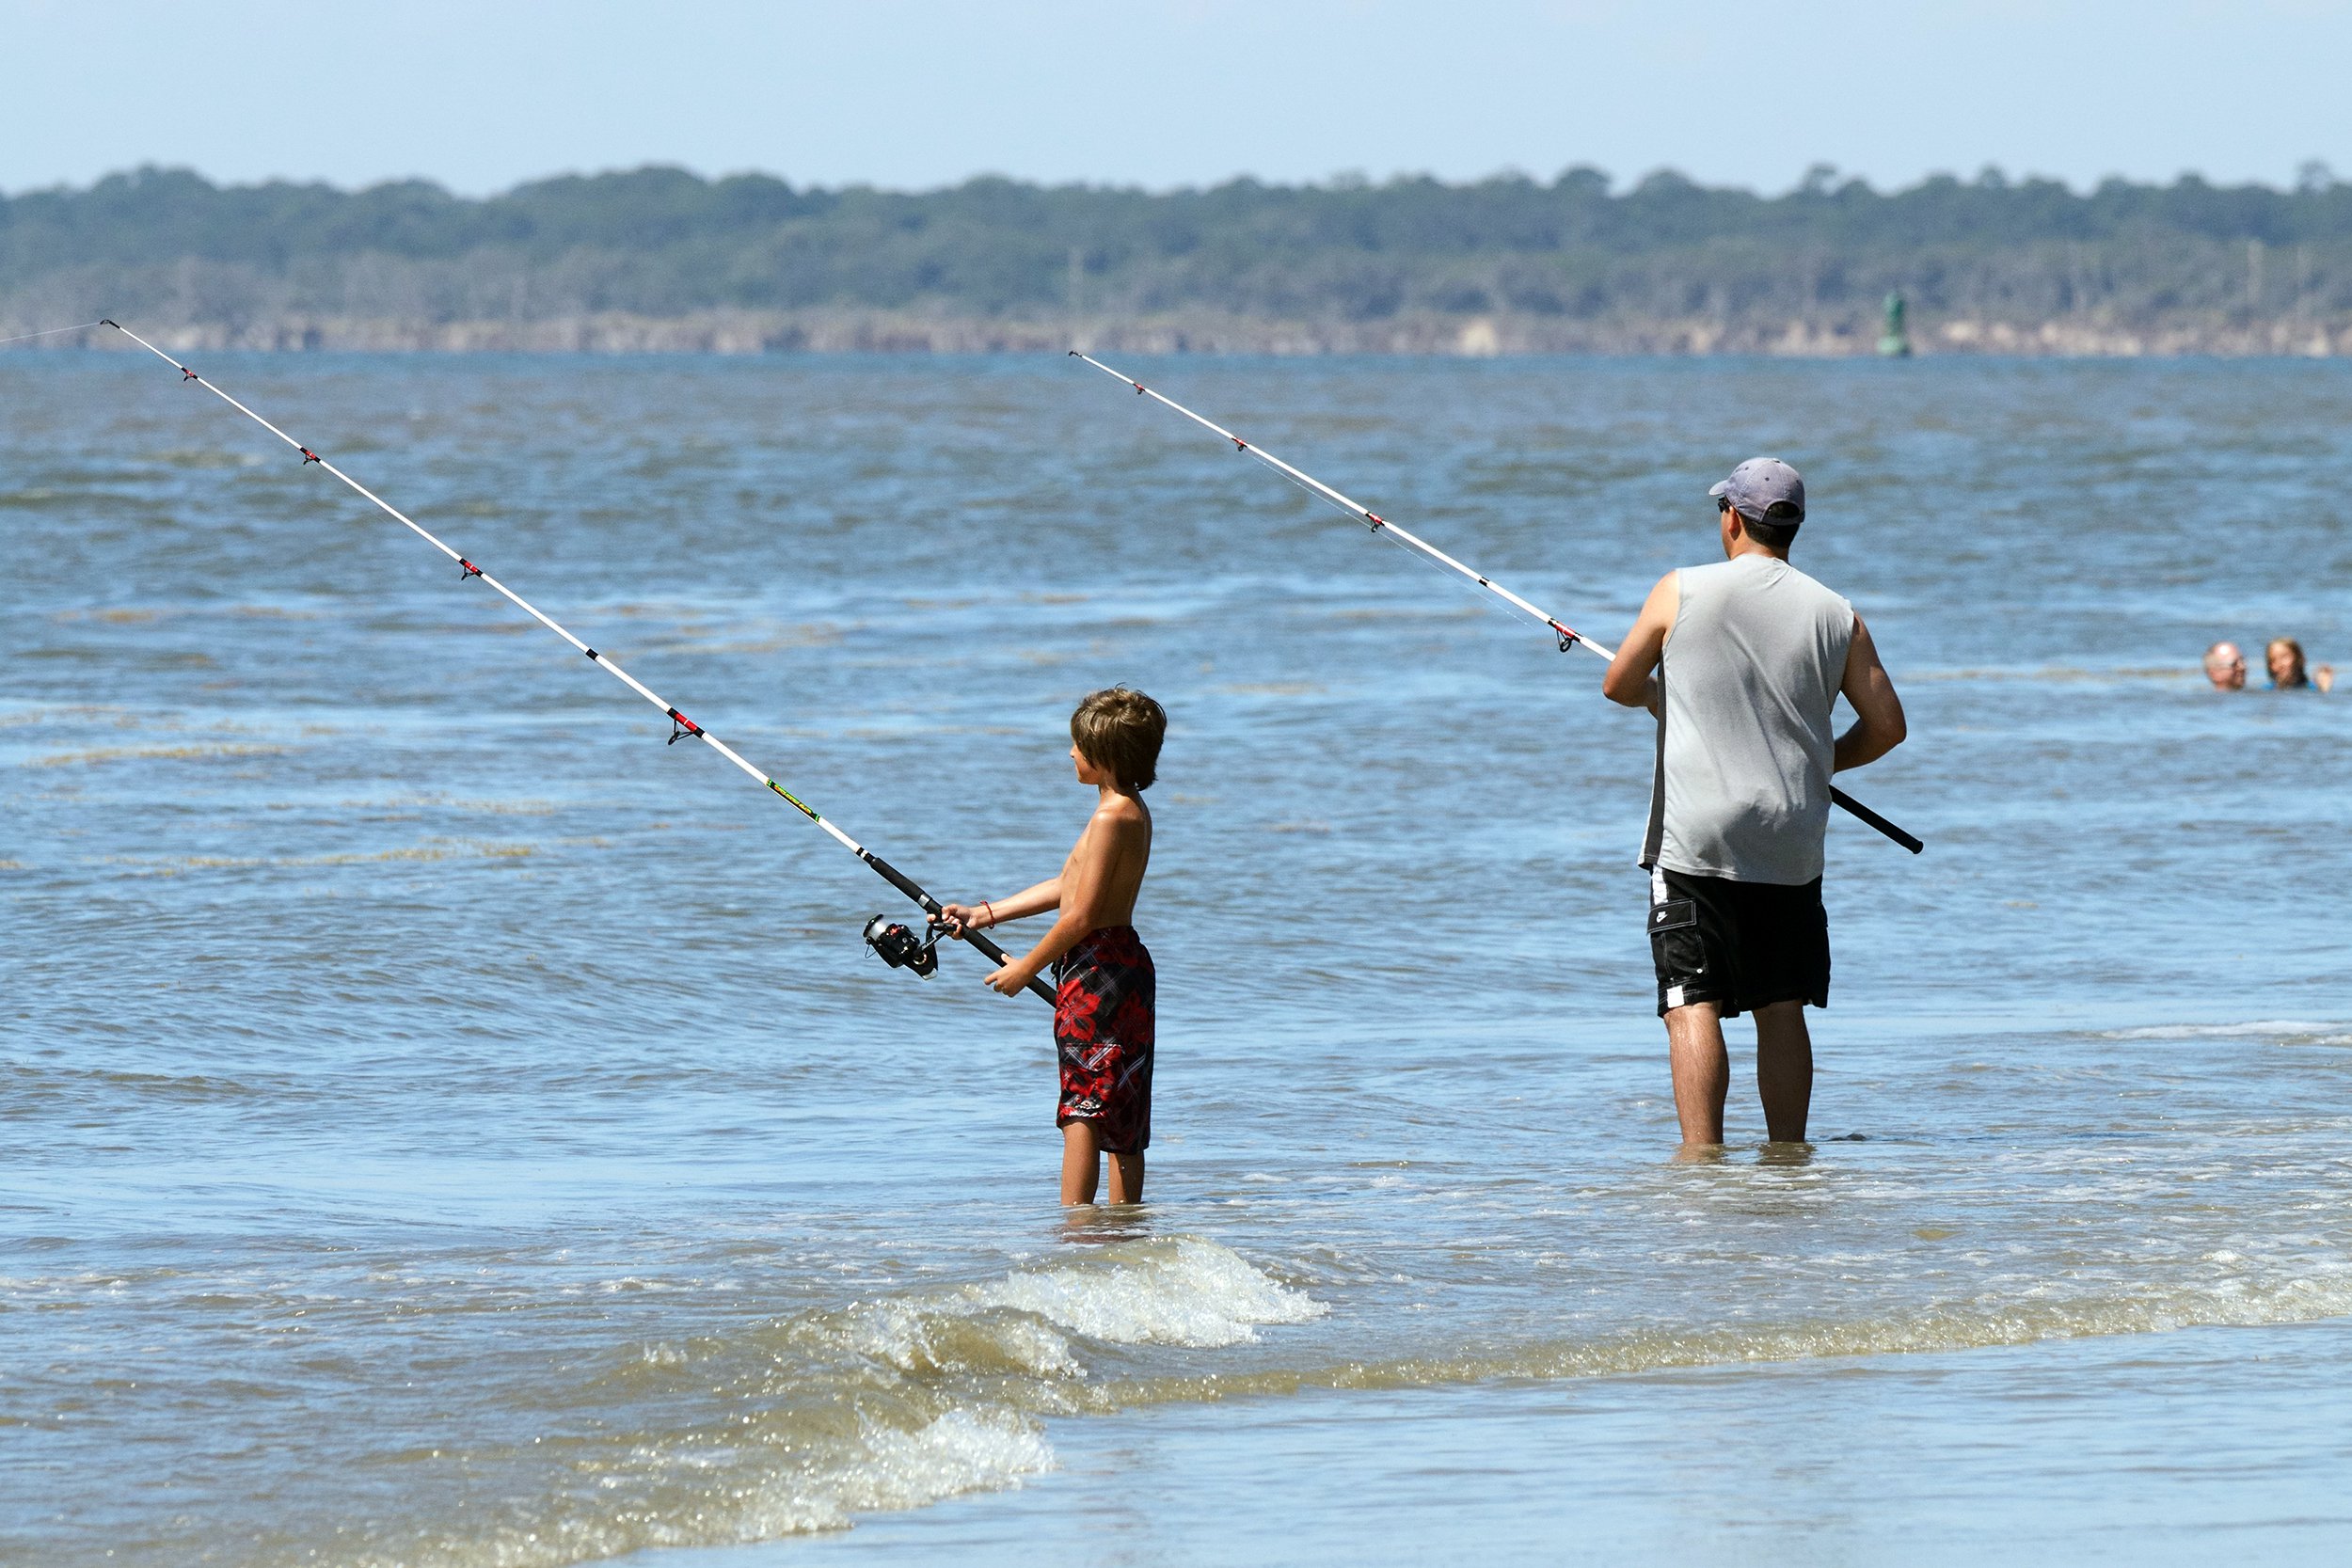 The <a href="https://www.goldenisles.com/play/activities/boating-and-fishing/">Golden Isles</a>, between Savannah and Jacksonville, Florida, on Georgia's Atlantic coast, boast one of the most dynamic ecosystems in the state — and that diversity offers some of the finest fishing in Georgia. Fly fish the coastal marshes for skipjack and redfish or charter a boat to pull some cobia, snapper or kingfish out of the water.